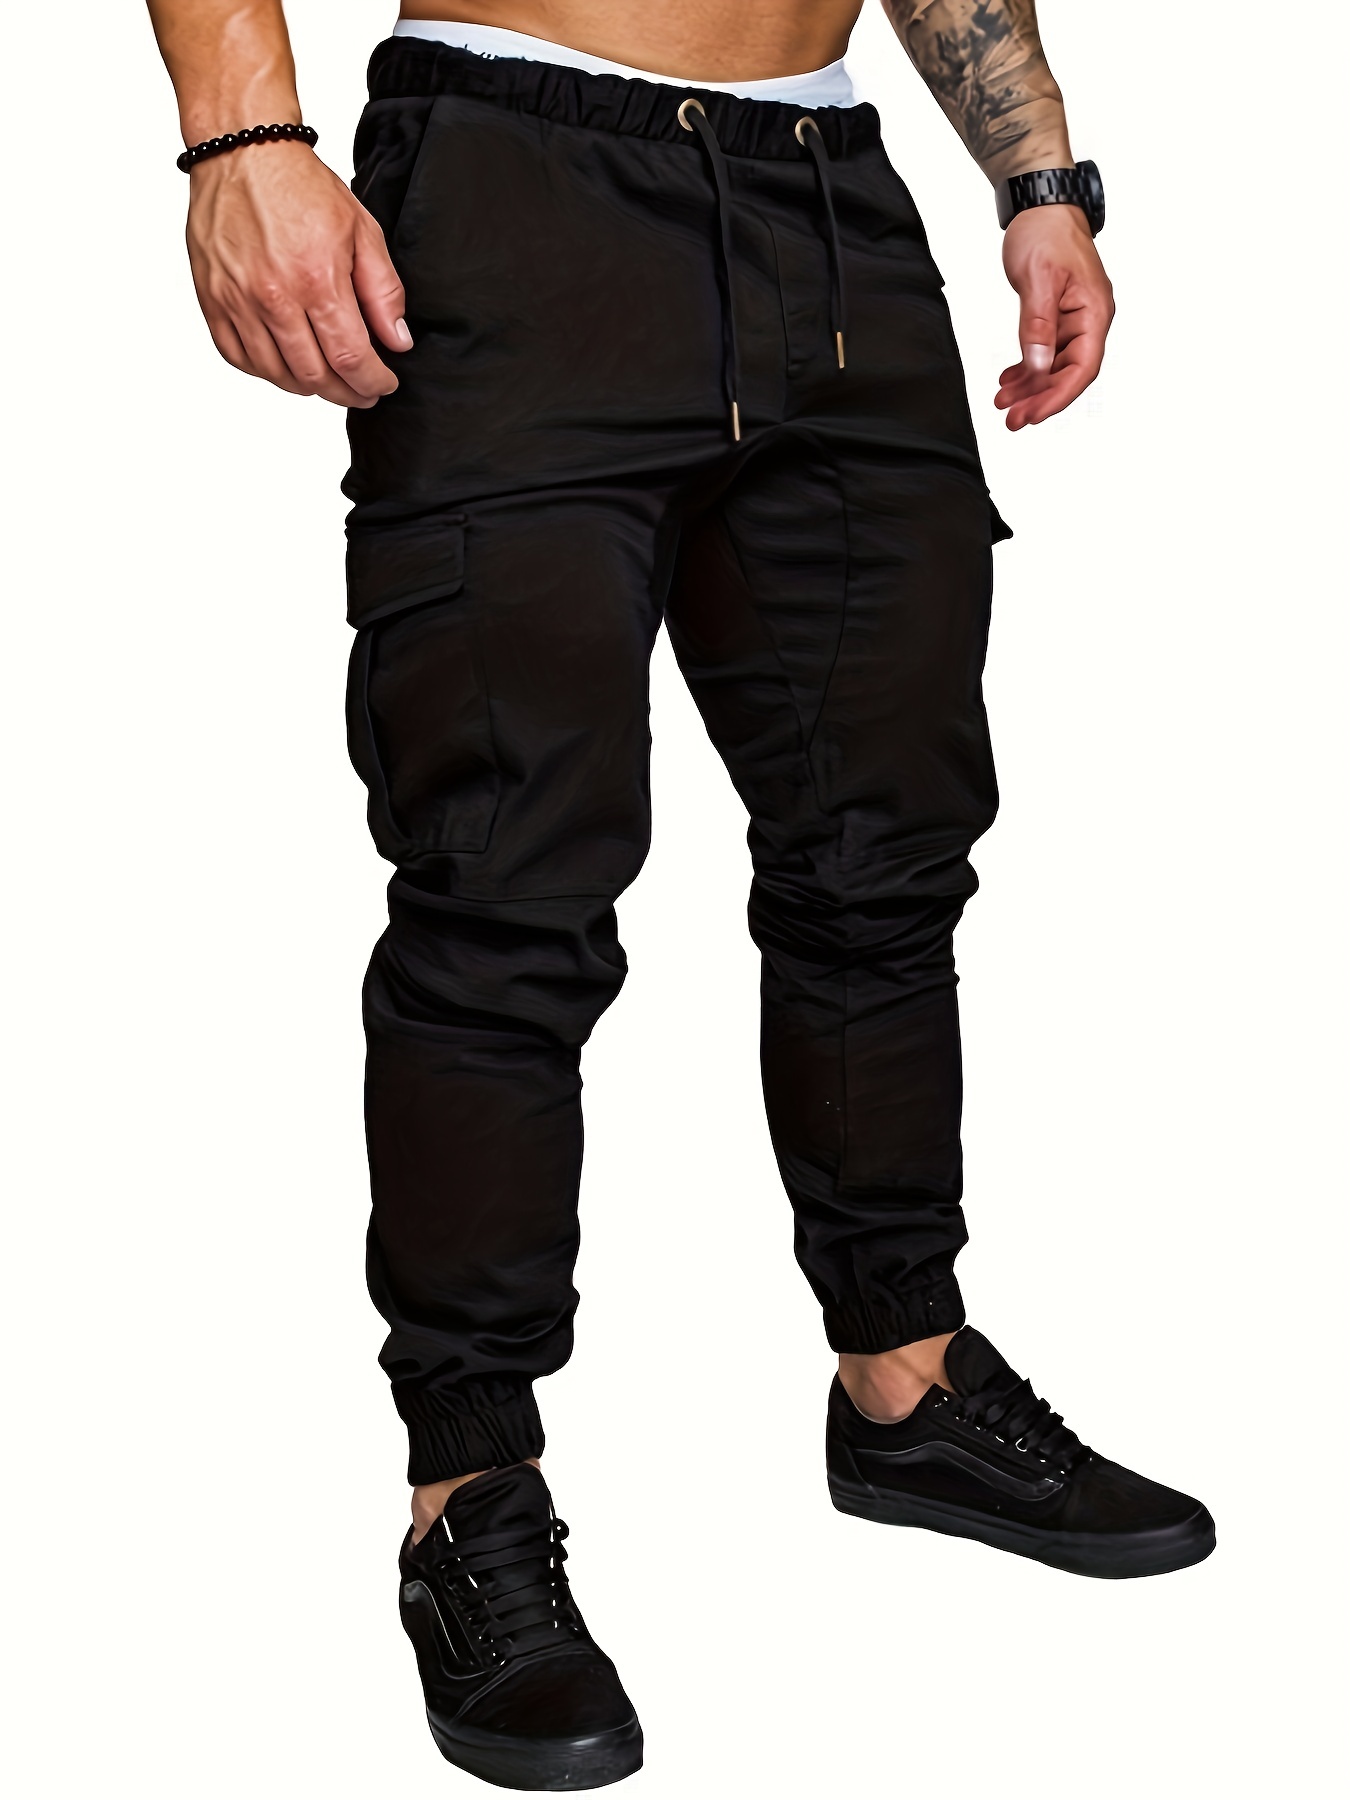 Slim Fit Cargo Pants  Slim fit cargo pants, Mens fashion casual